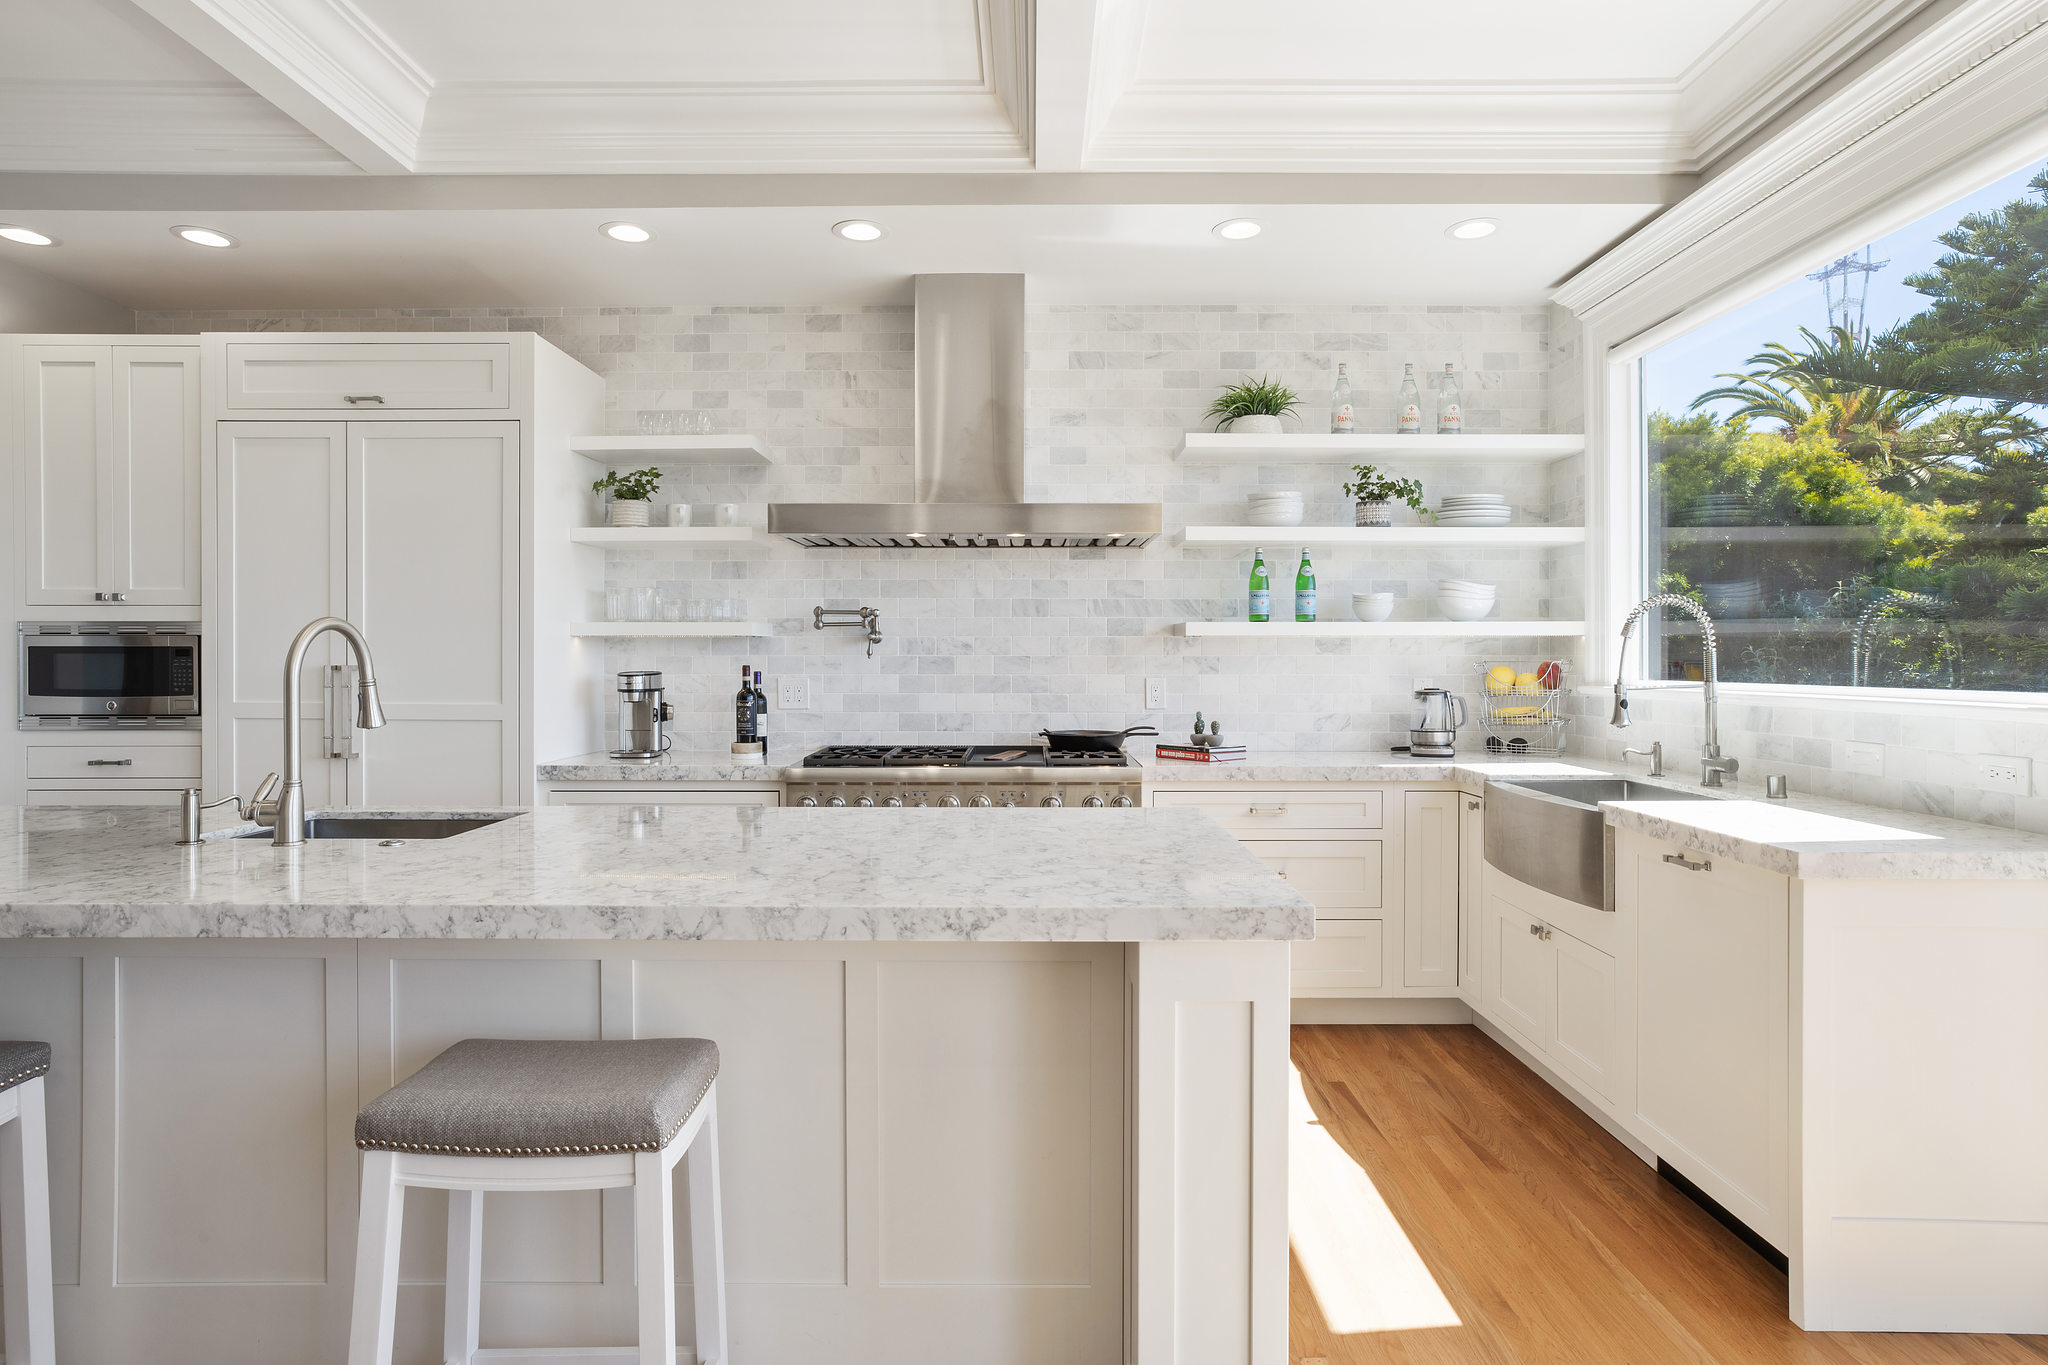 Property Photo: View of the kitchen, featuring luxurious white cabinetry, island, and a large window over the sink